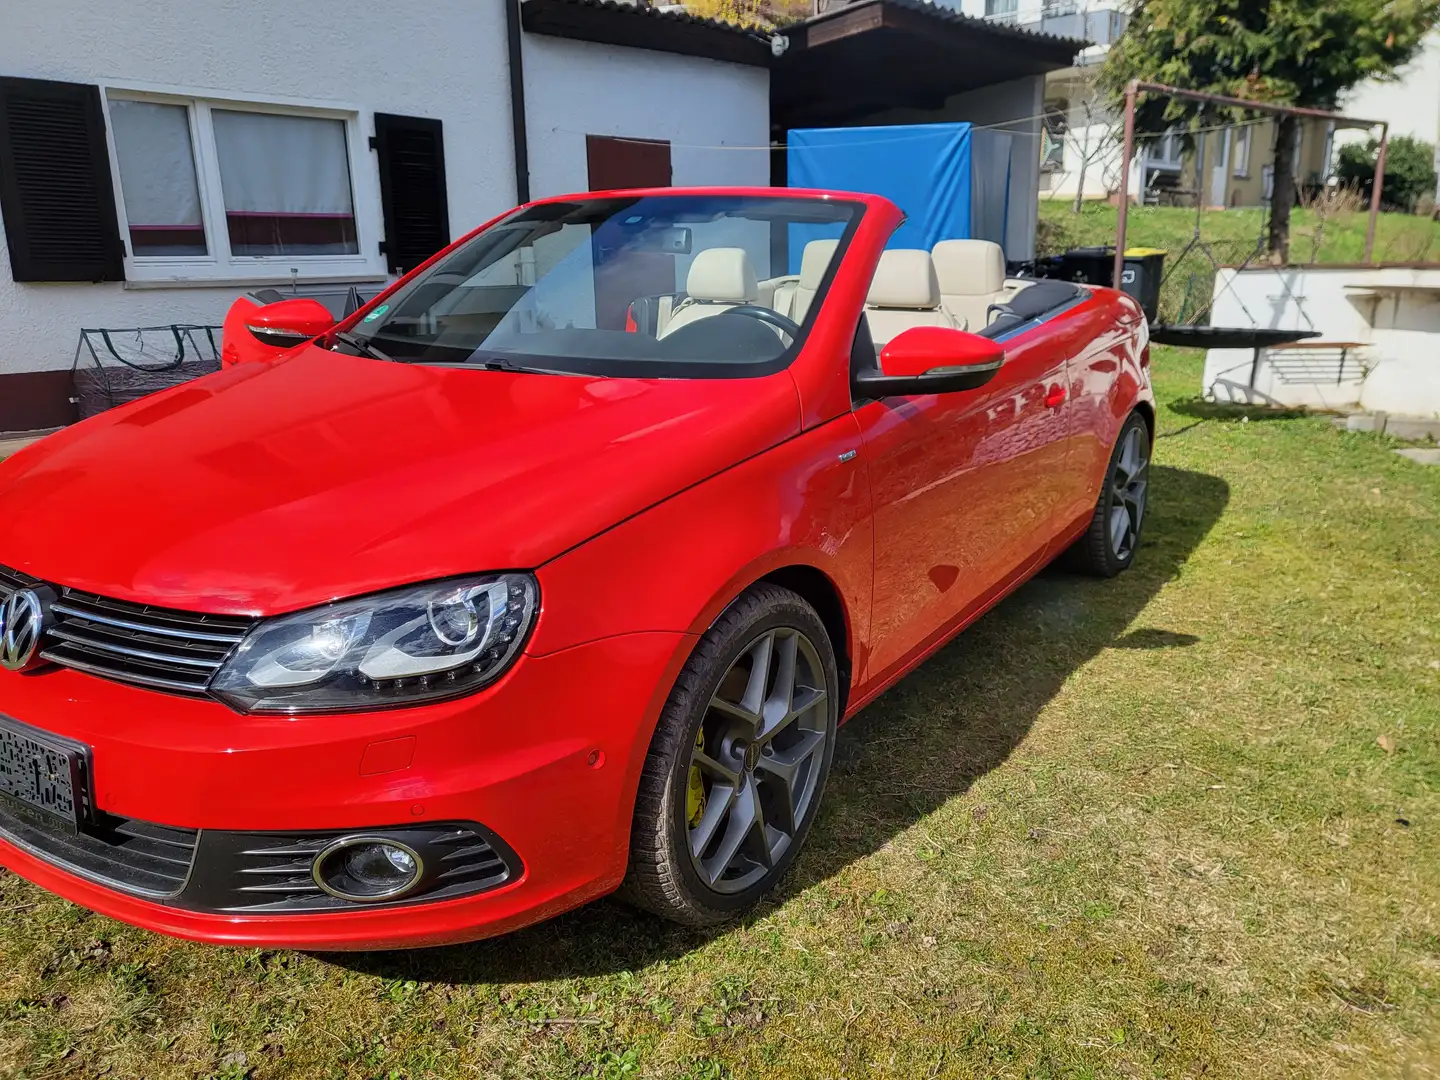 Volkswagen Eos Eos 2.0 TDI DPF BlueMotion Technology Cup Rosso - 1